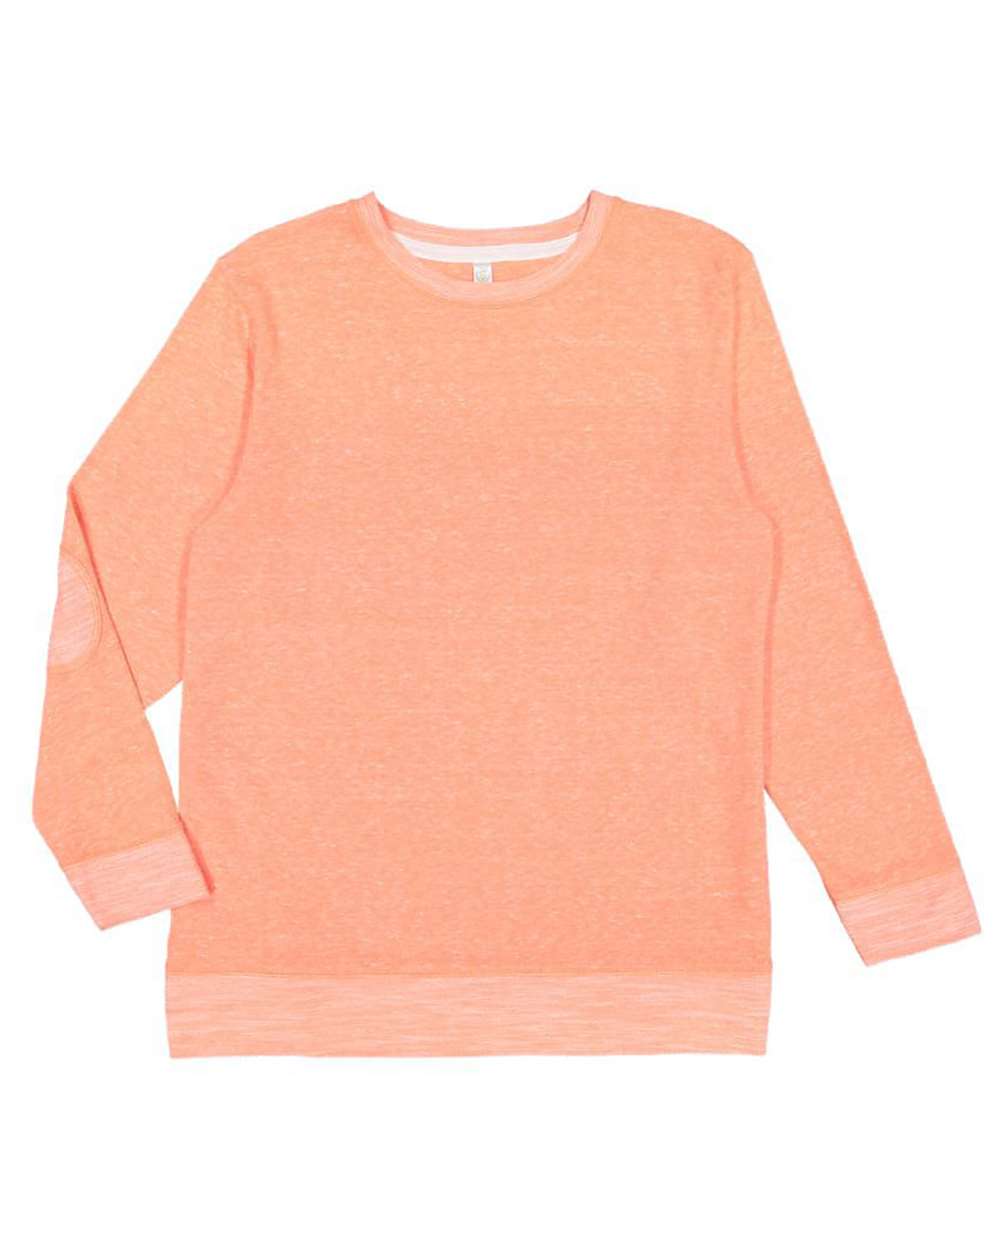 Papaya Melange French Terry Pullover Top - T9539PP